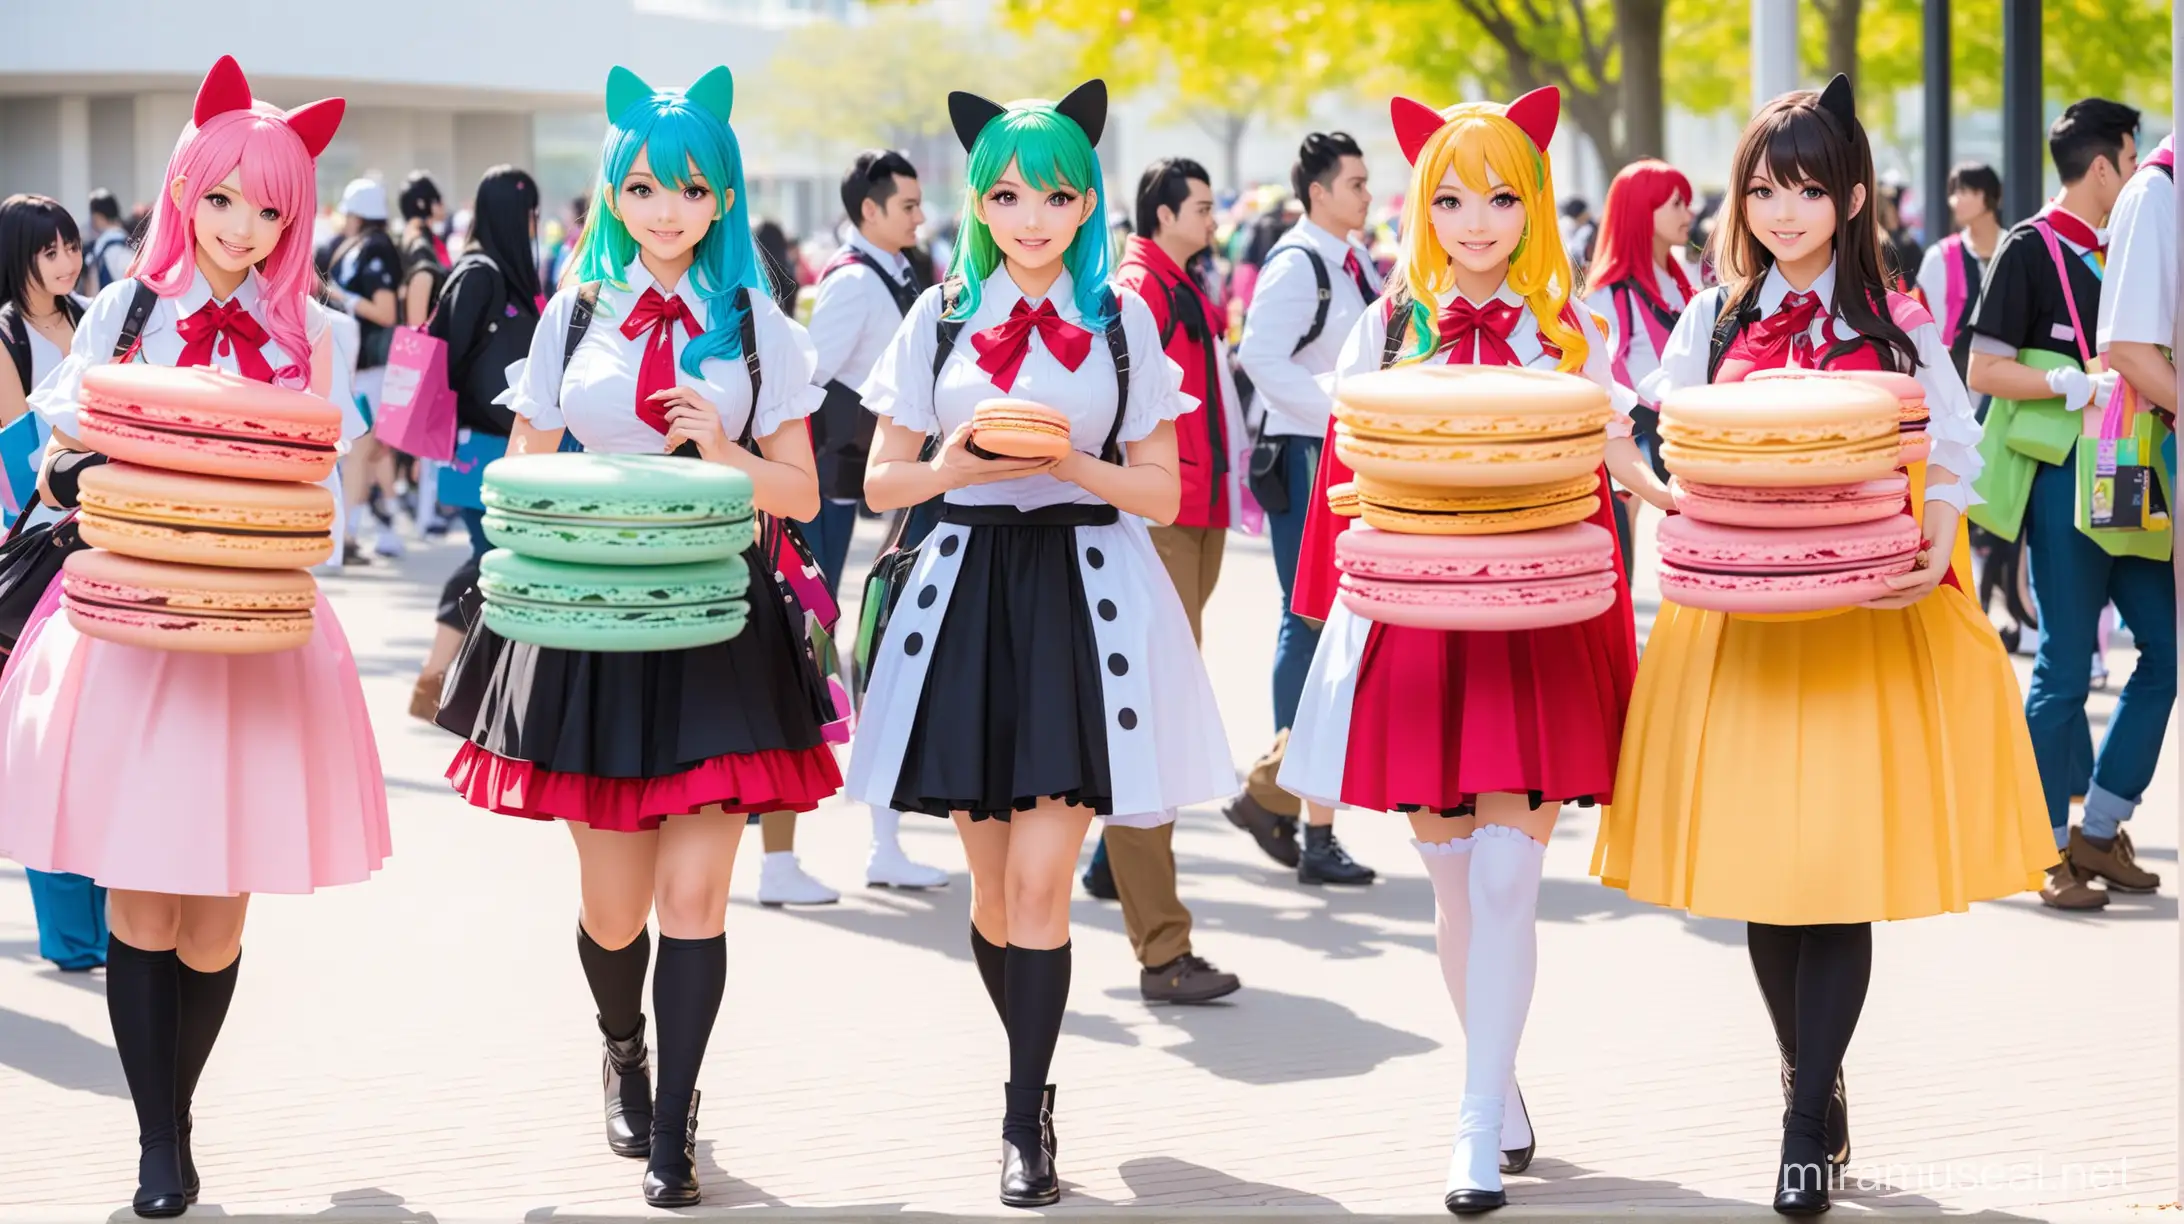 Anime Cosplayers with Colorful Macaron Boxes at Convention